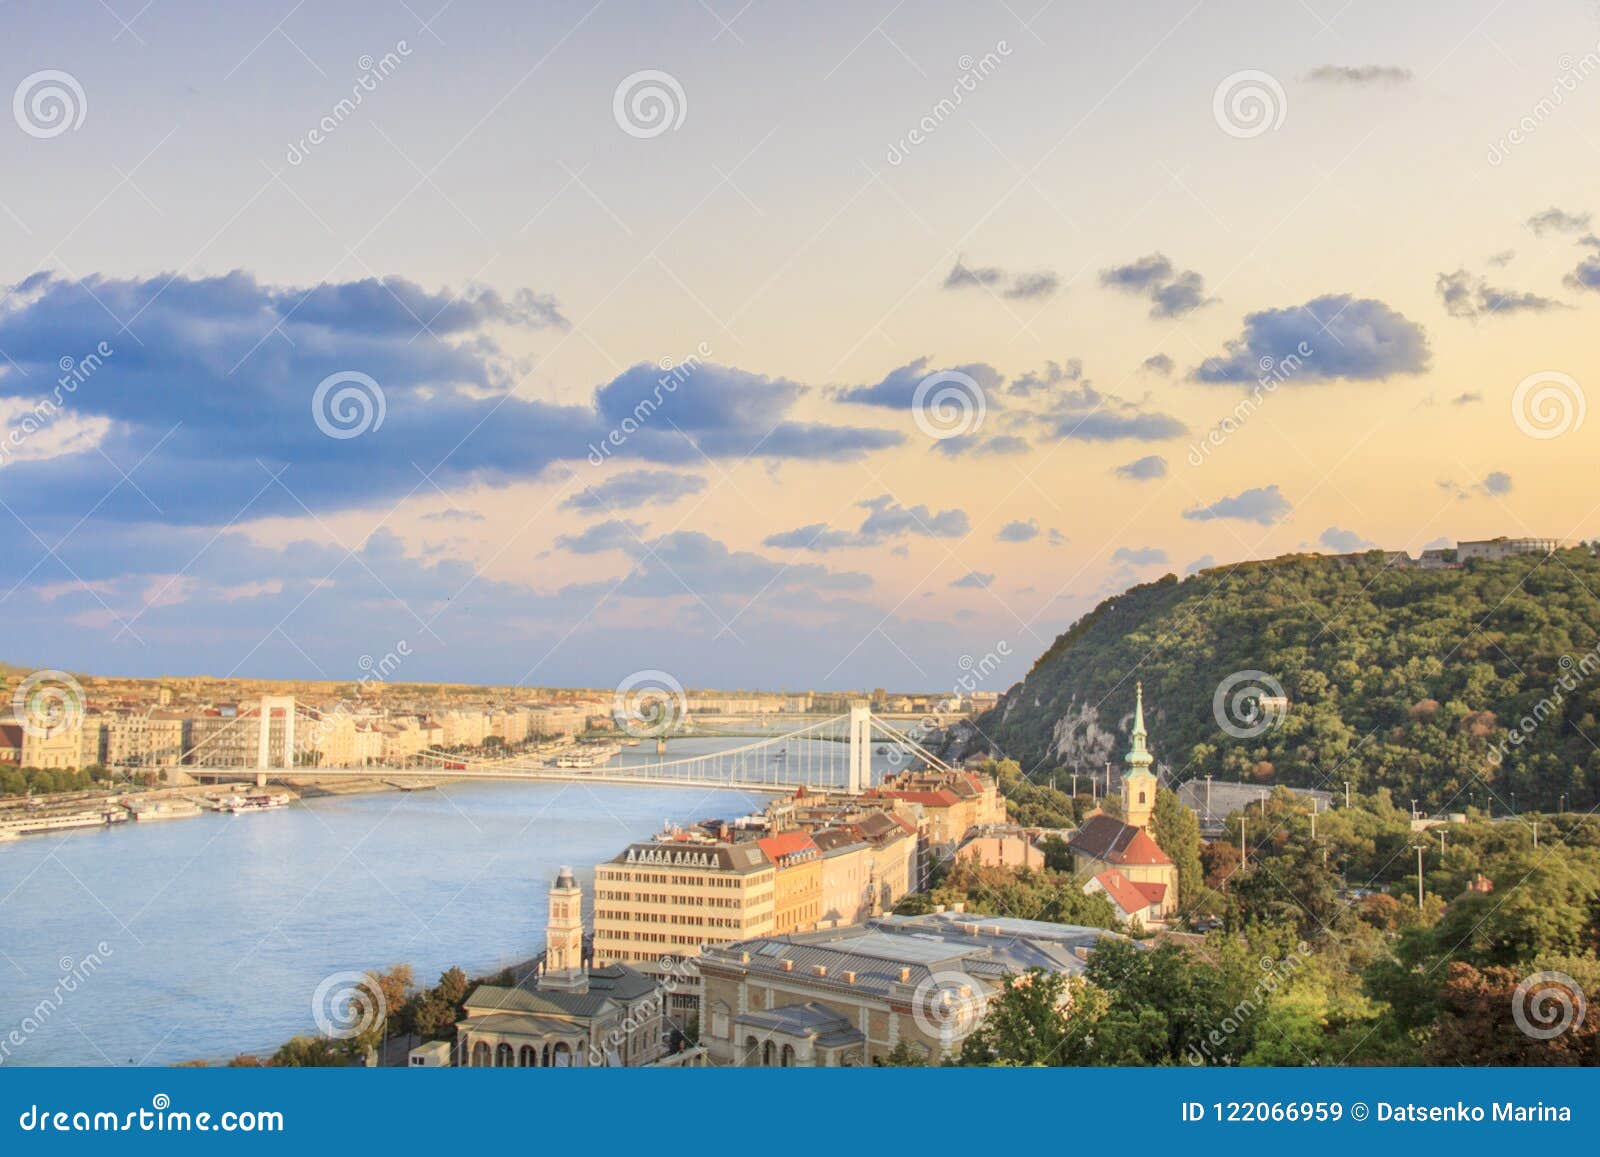 beautiful views of the danube and the gellrt hill in budapest, hungary